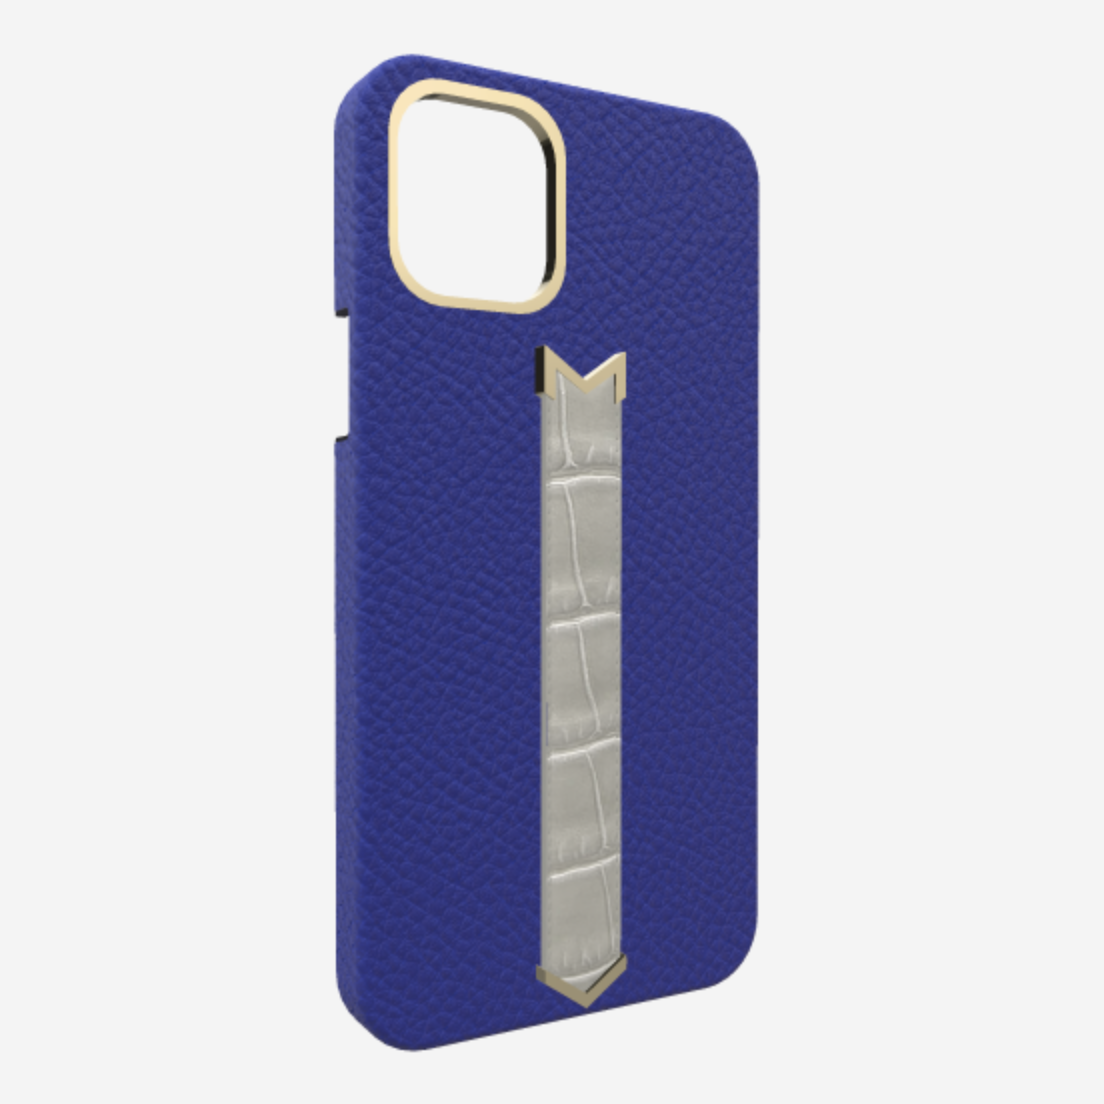 Gold Finger Strap Case for iPhone 13 in Genuine Calfskin and Alligator Electric Blue Pearl Grey 